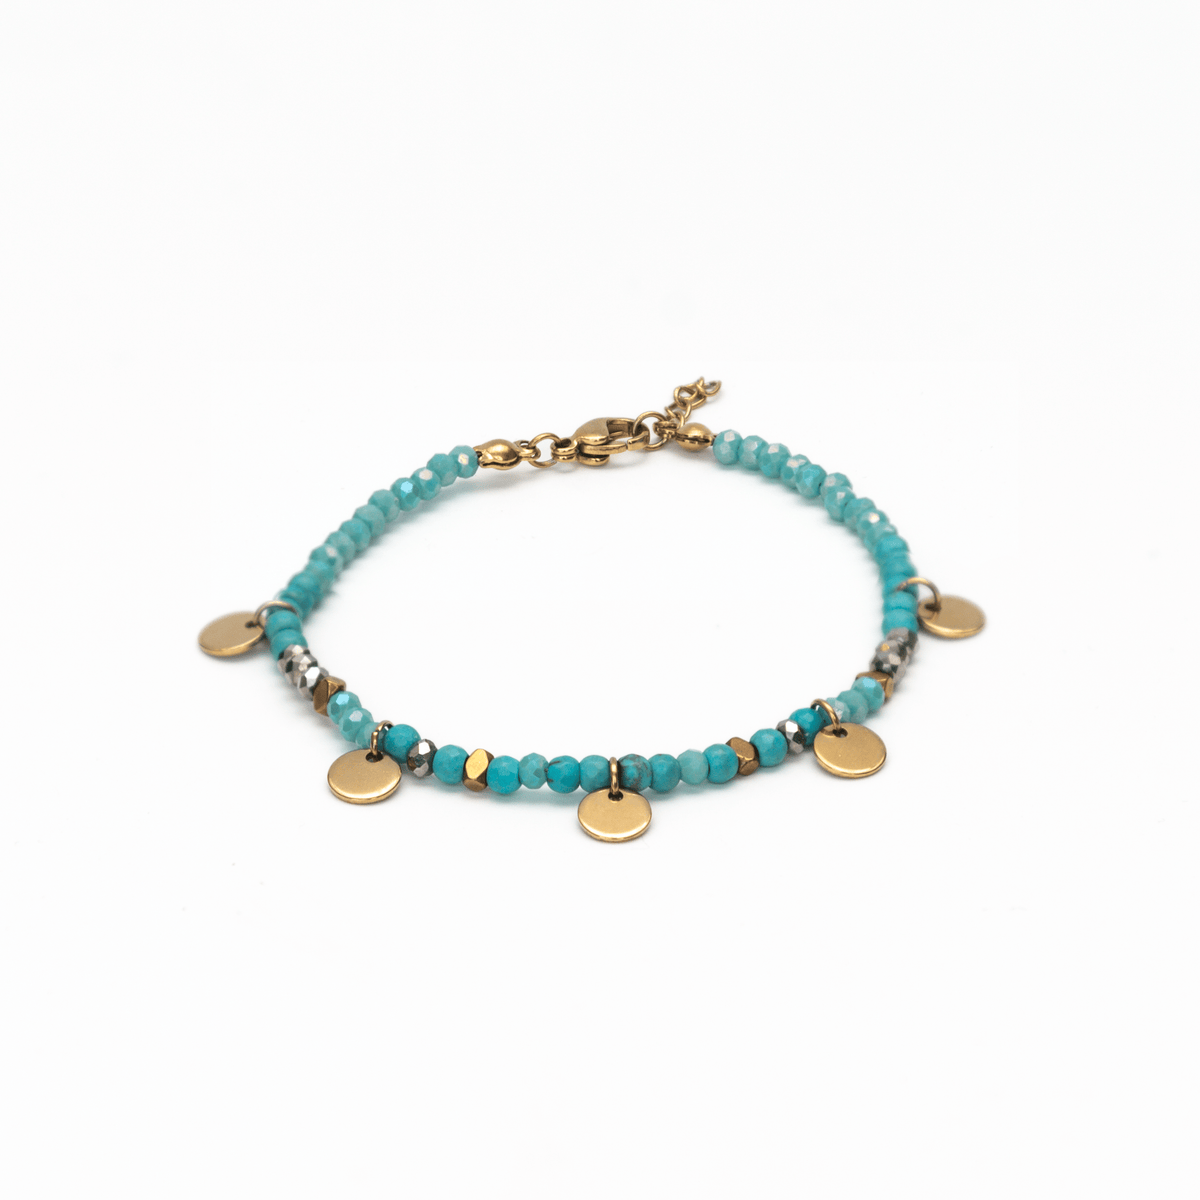 Turquoise Beaded Bracelet with Charms